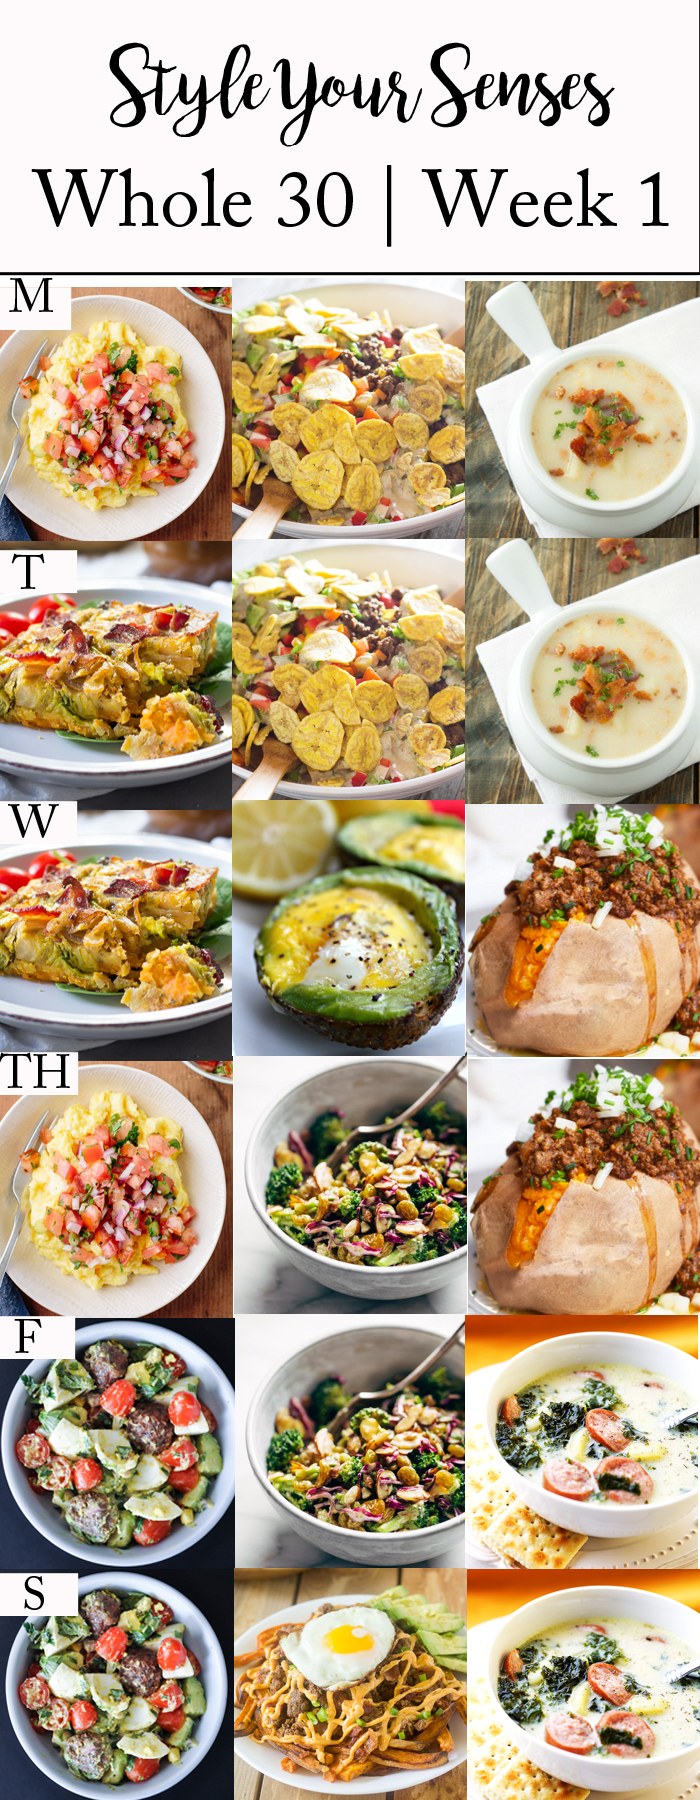 Whole 30 meal plan ideas plus why I chose this lifestyle change - Whole 30 Week 1 details featured by popular Texas lifestyle blogger, Style Your Senses